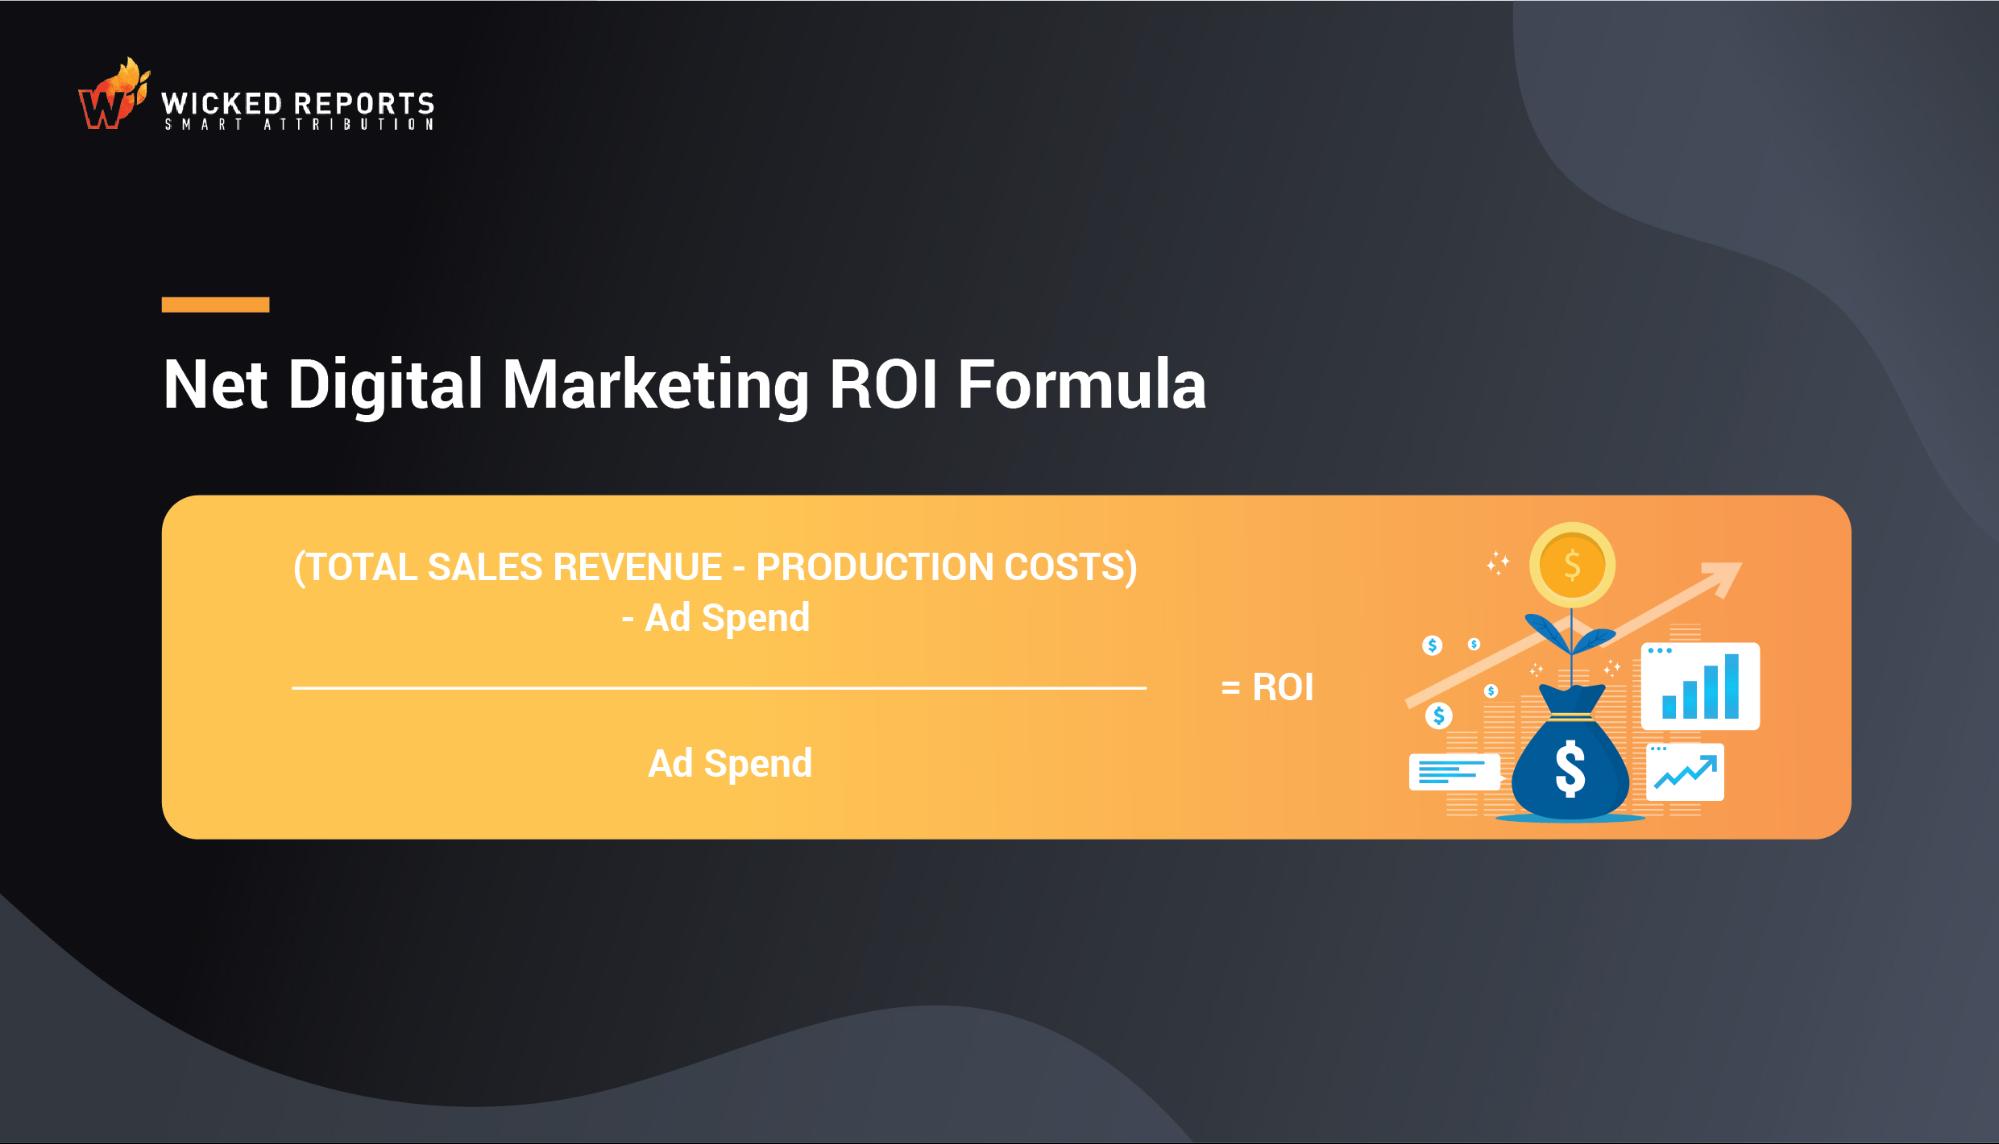 How to Track the ROI of Your Digital Marketing